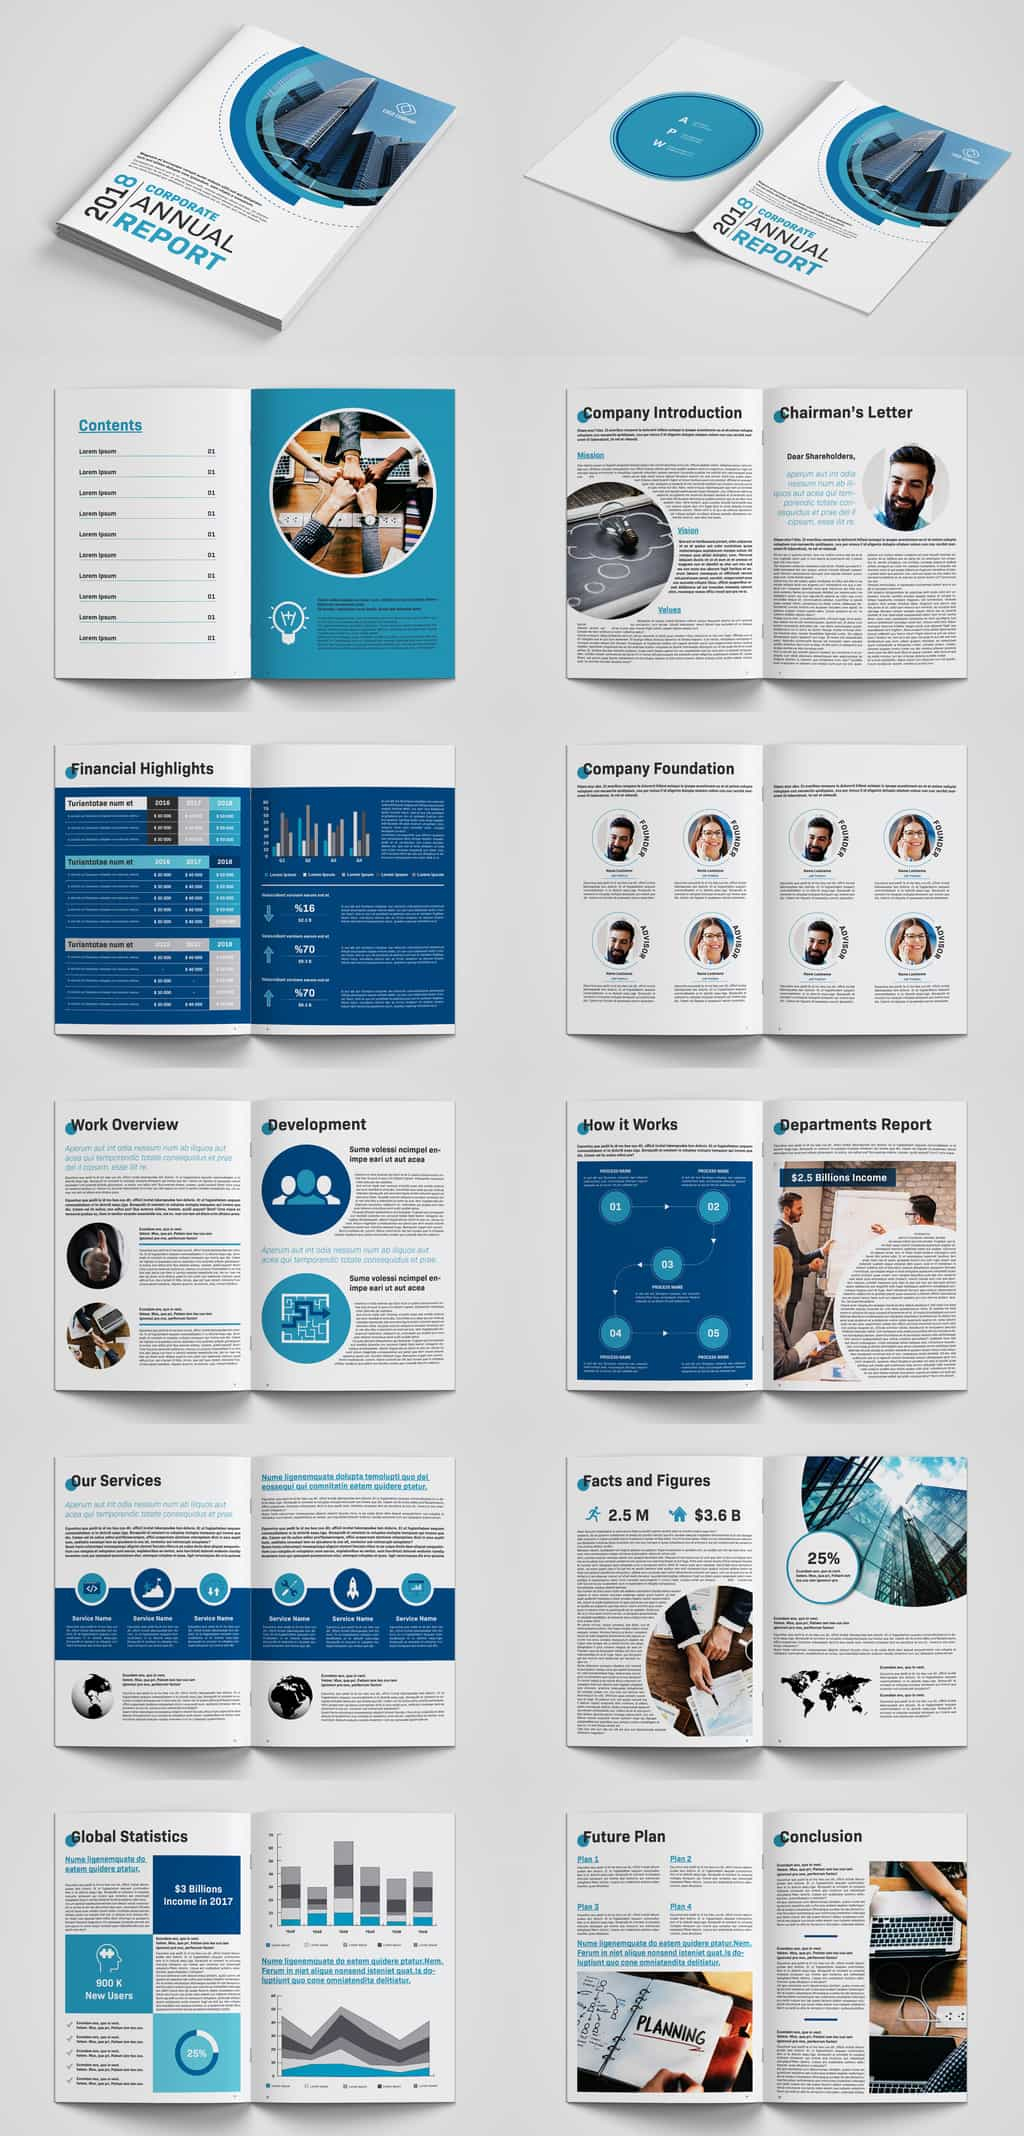 10 Modern Annual Report Design Templates [Free and Paid]  Redokun  Inside Chairman